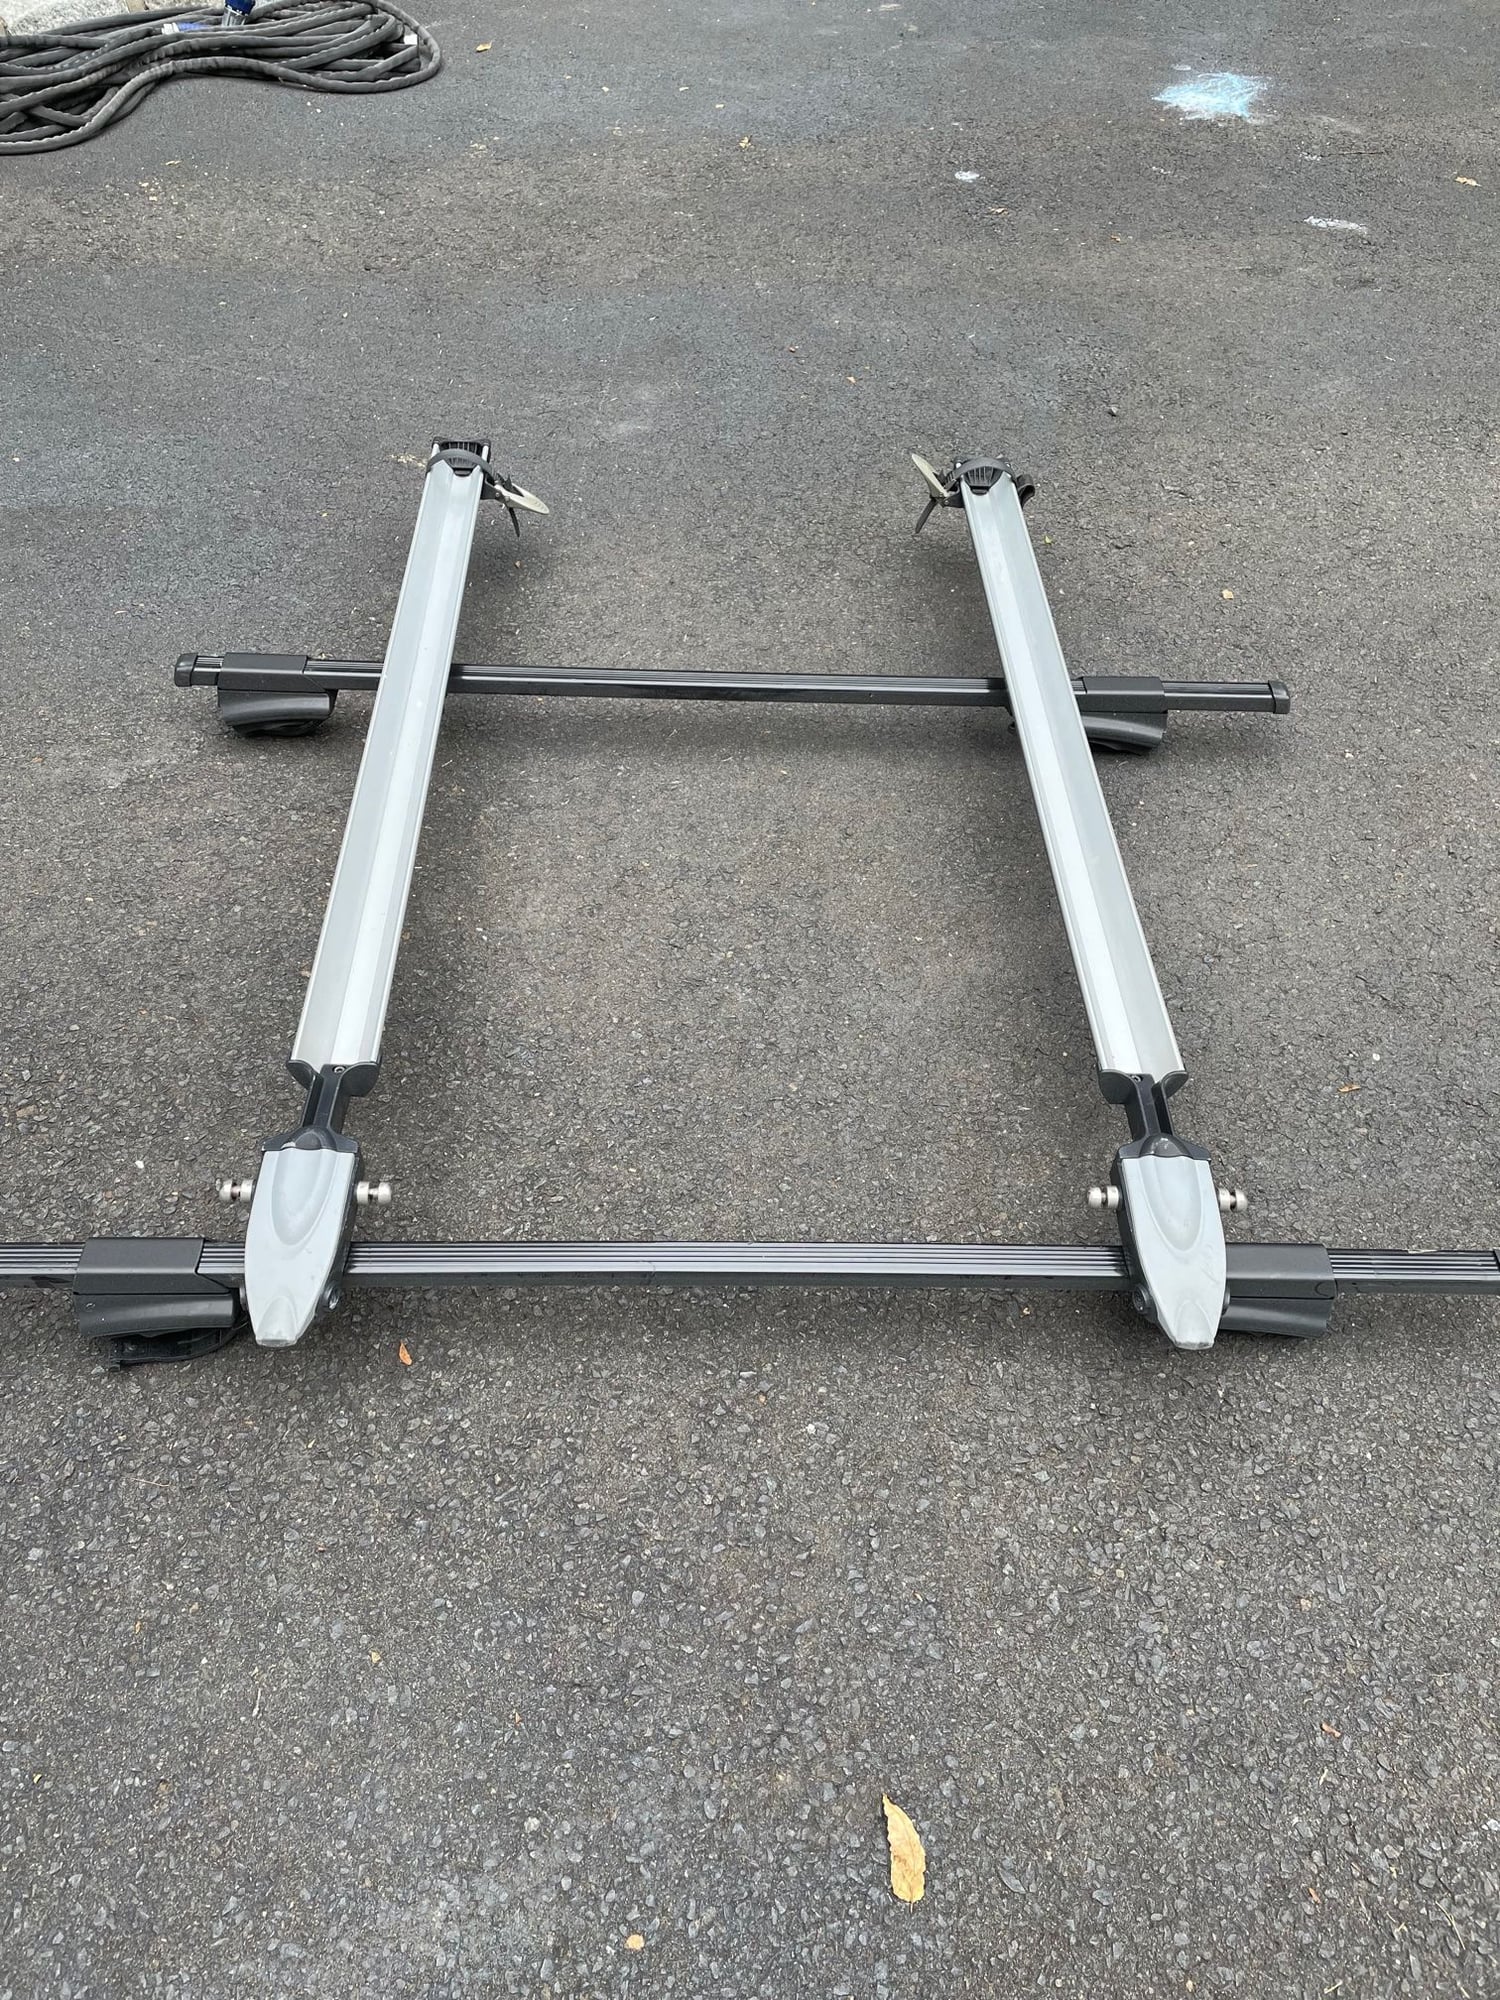 Accessories - Thule Roof rack w/ 2 bike and snowboard/ski attachments w/ locks - Used - All Years Any Make All Models - Norwalk, CT 06850, United States